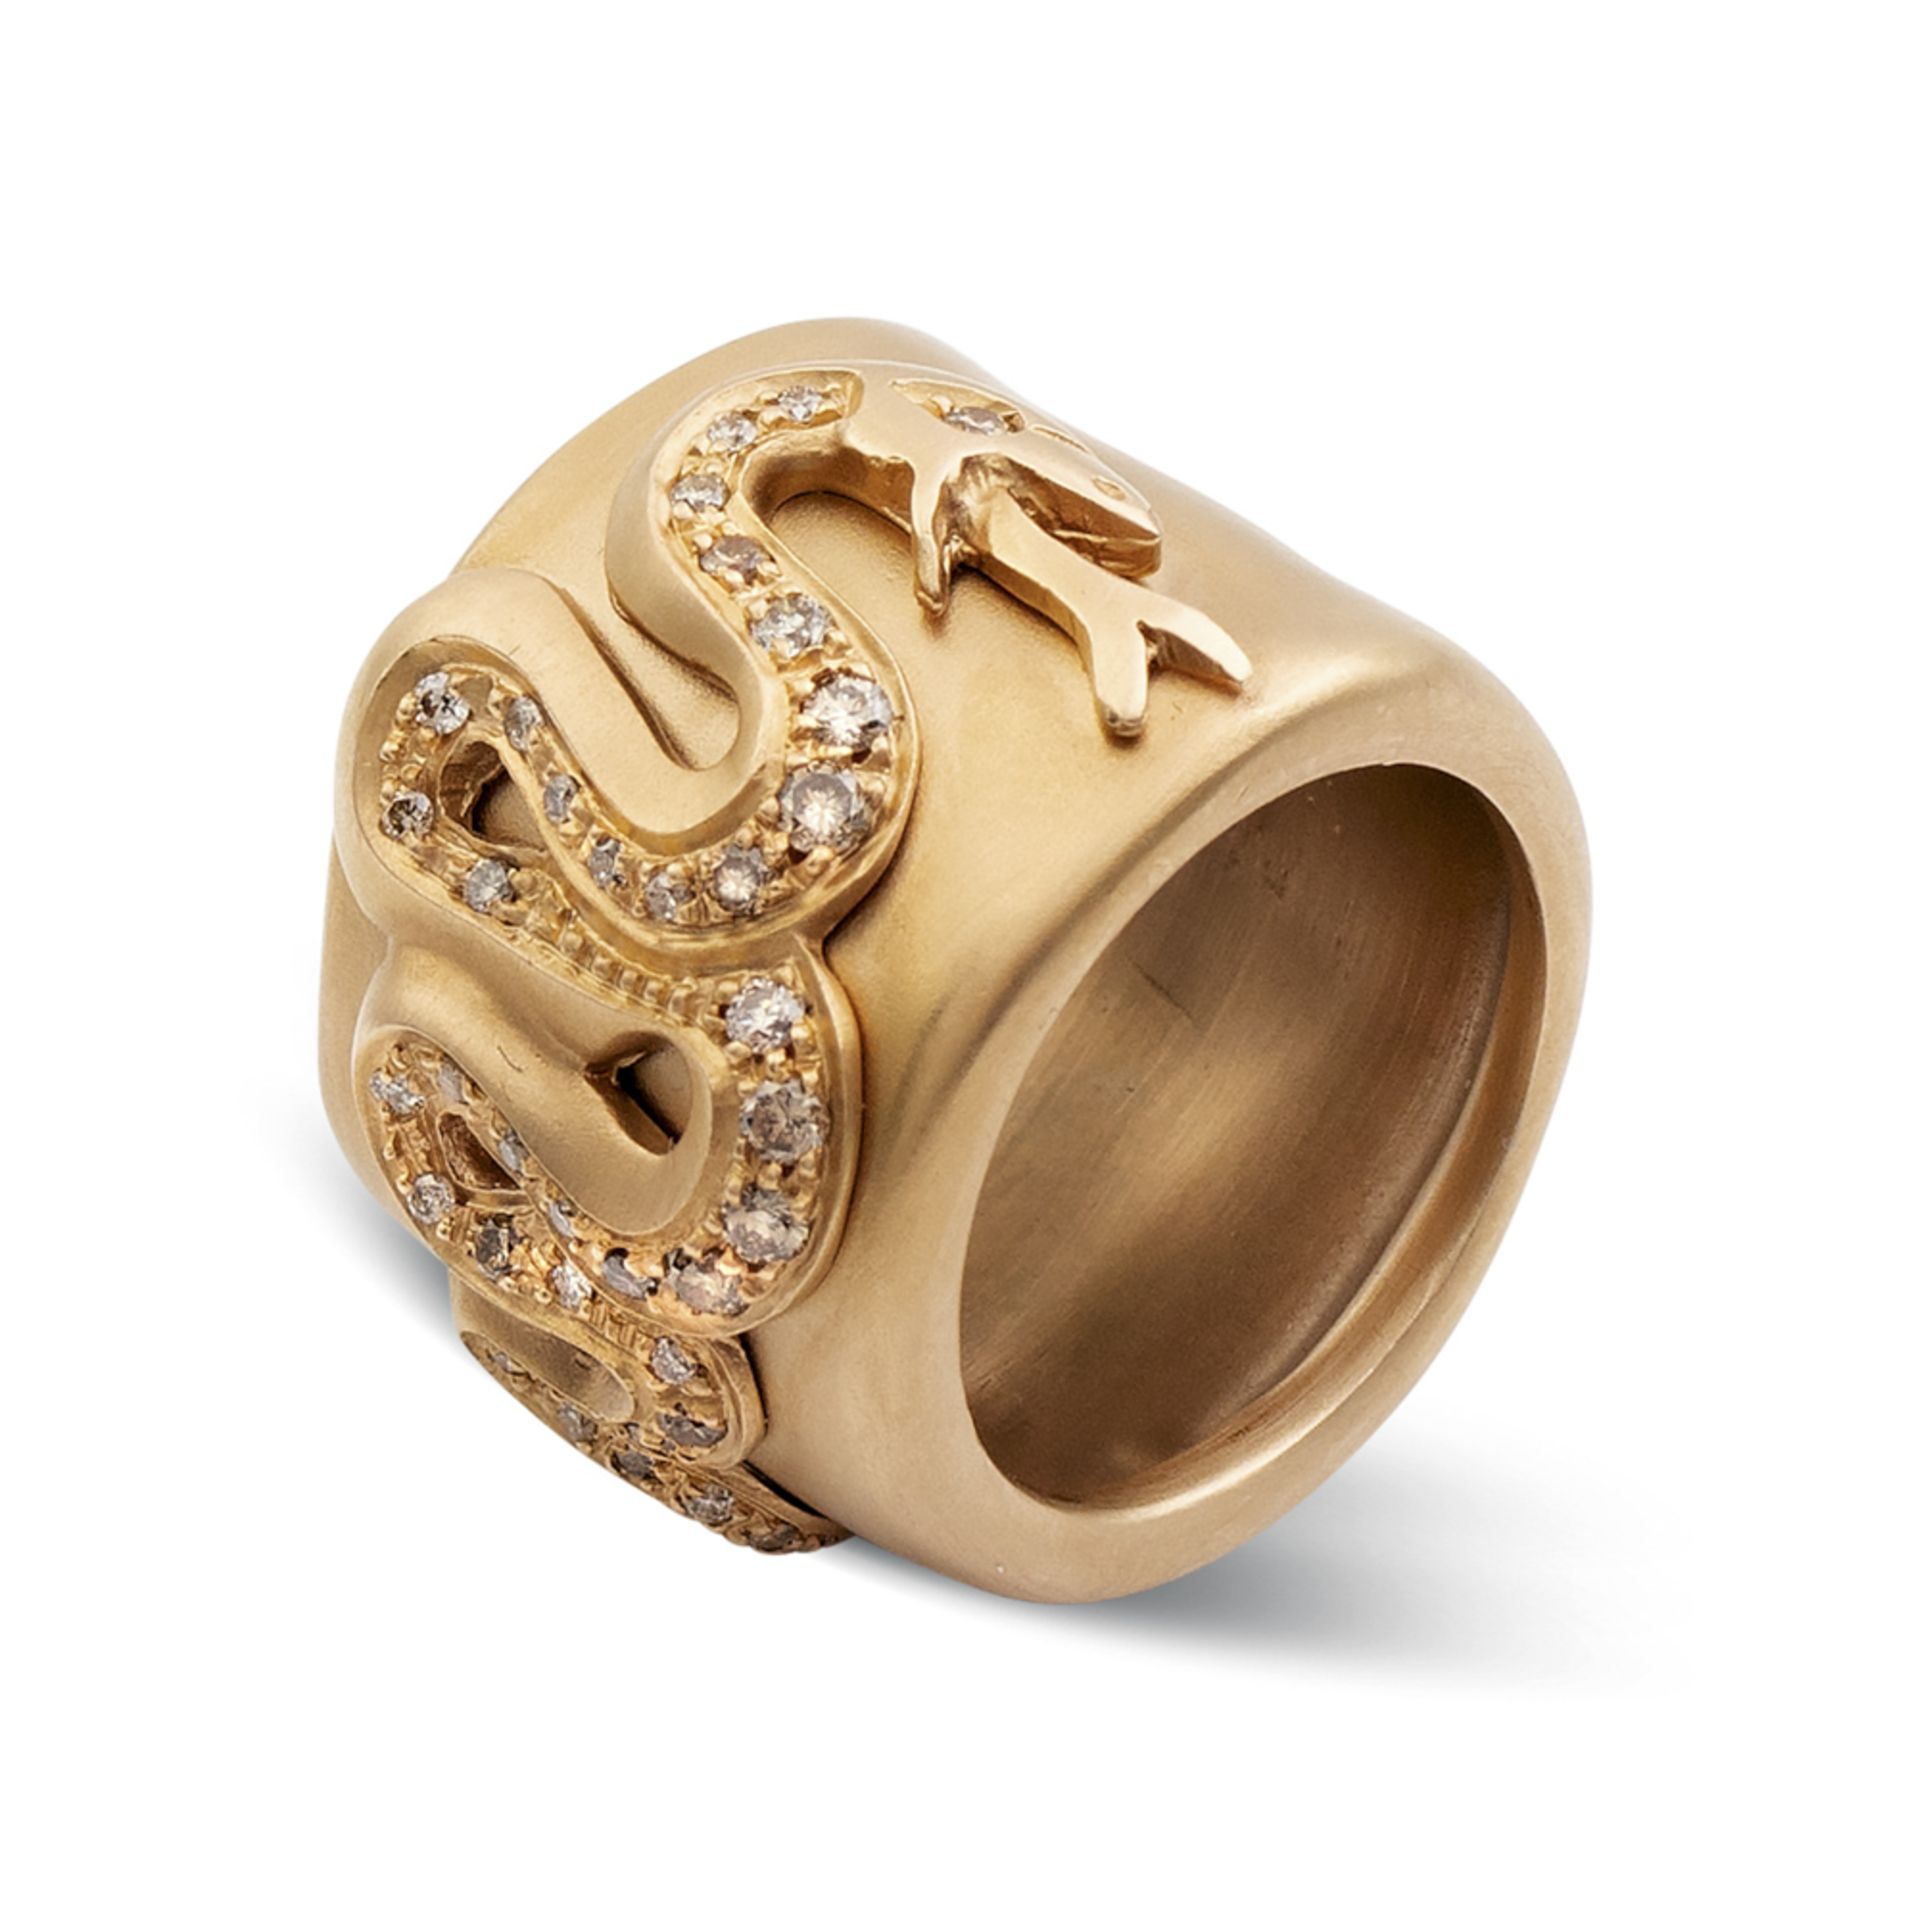 Pomellato "Eva" collection band ring weight 26 gr.